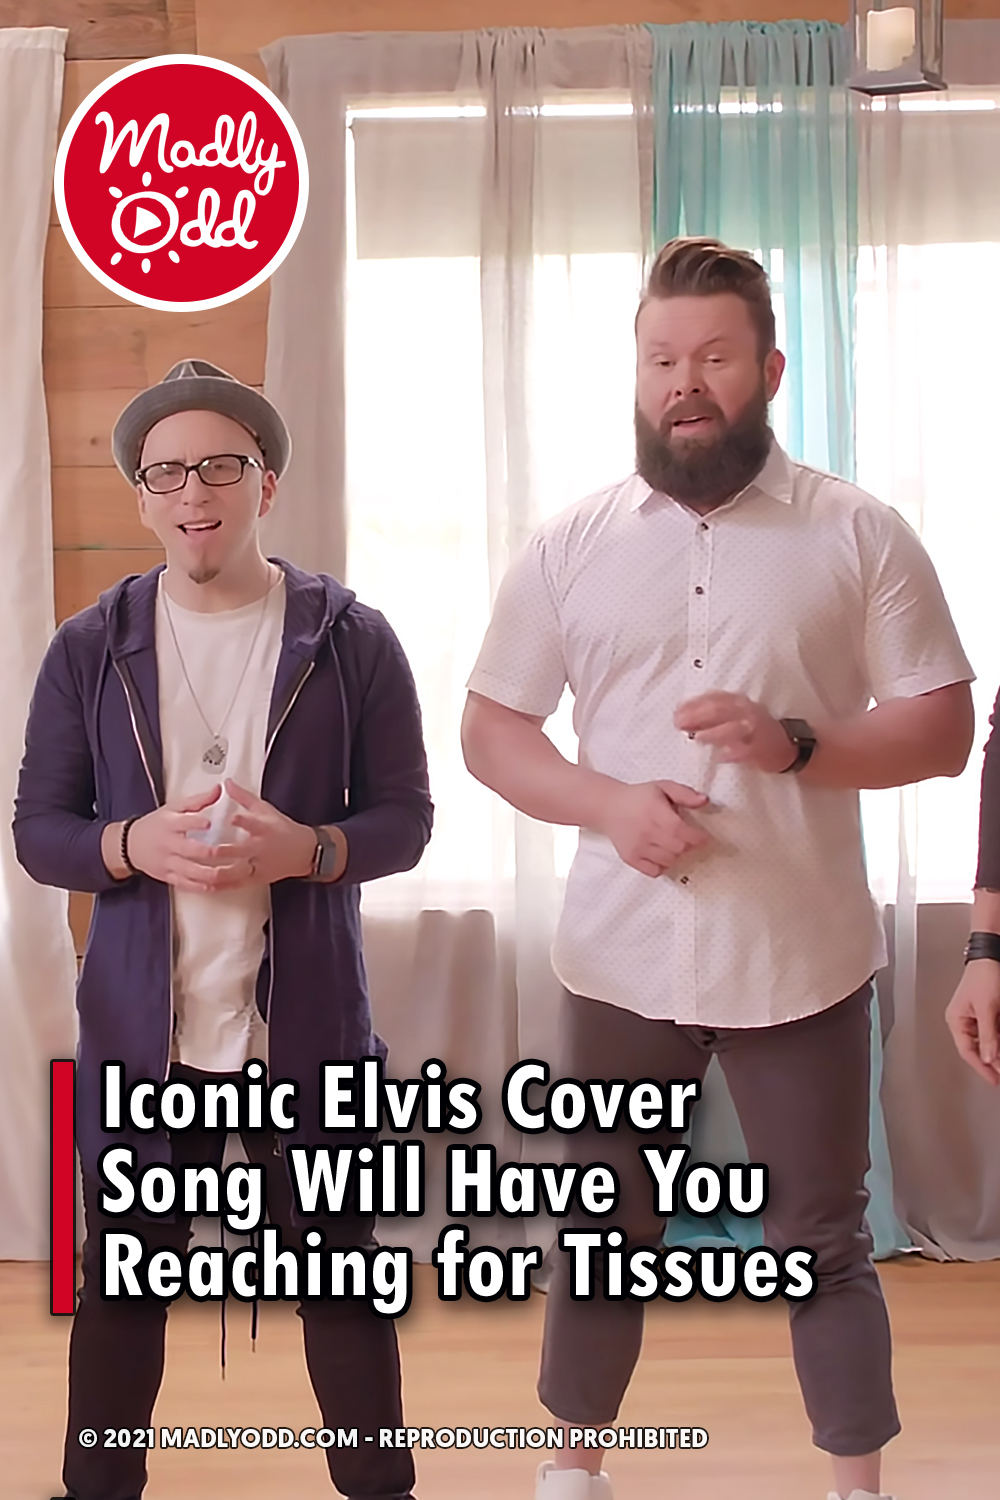 Iconic Elvis Cover Song Will Have You Reaching for Tissues